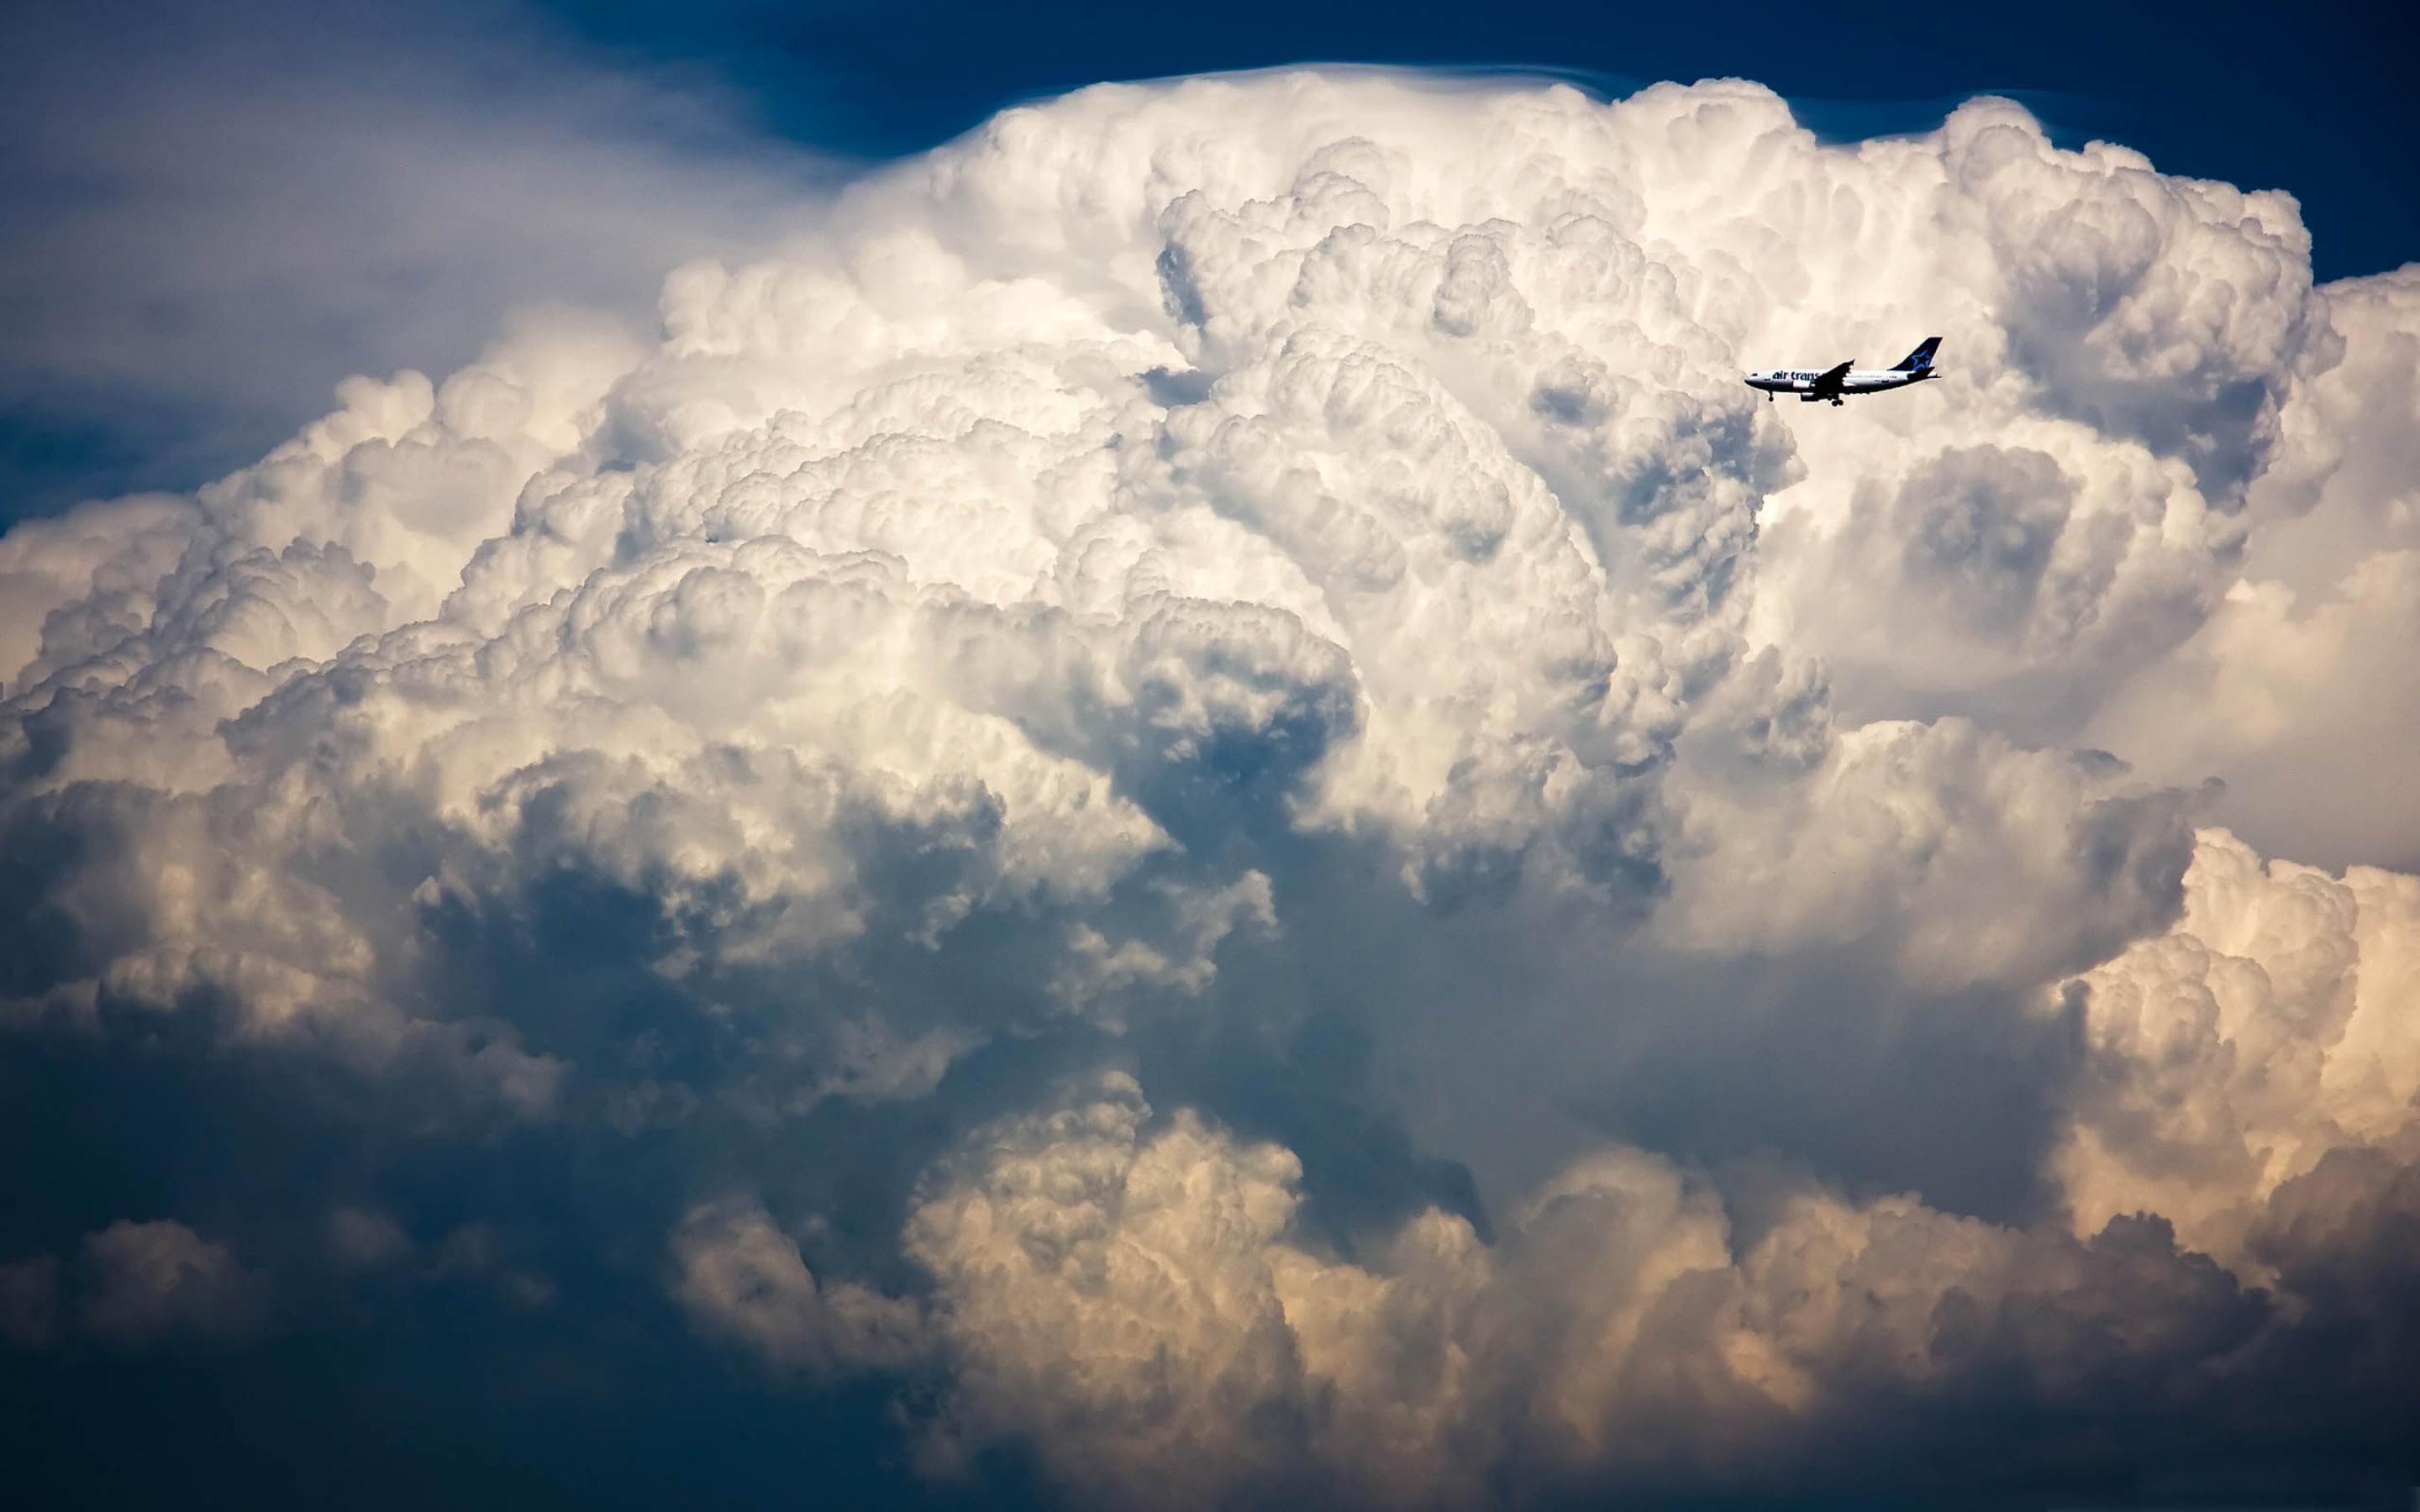 The plane in clouds wallpapers and images - wallpapers, pictures